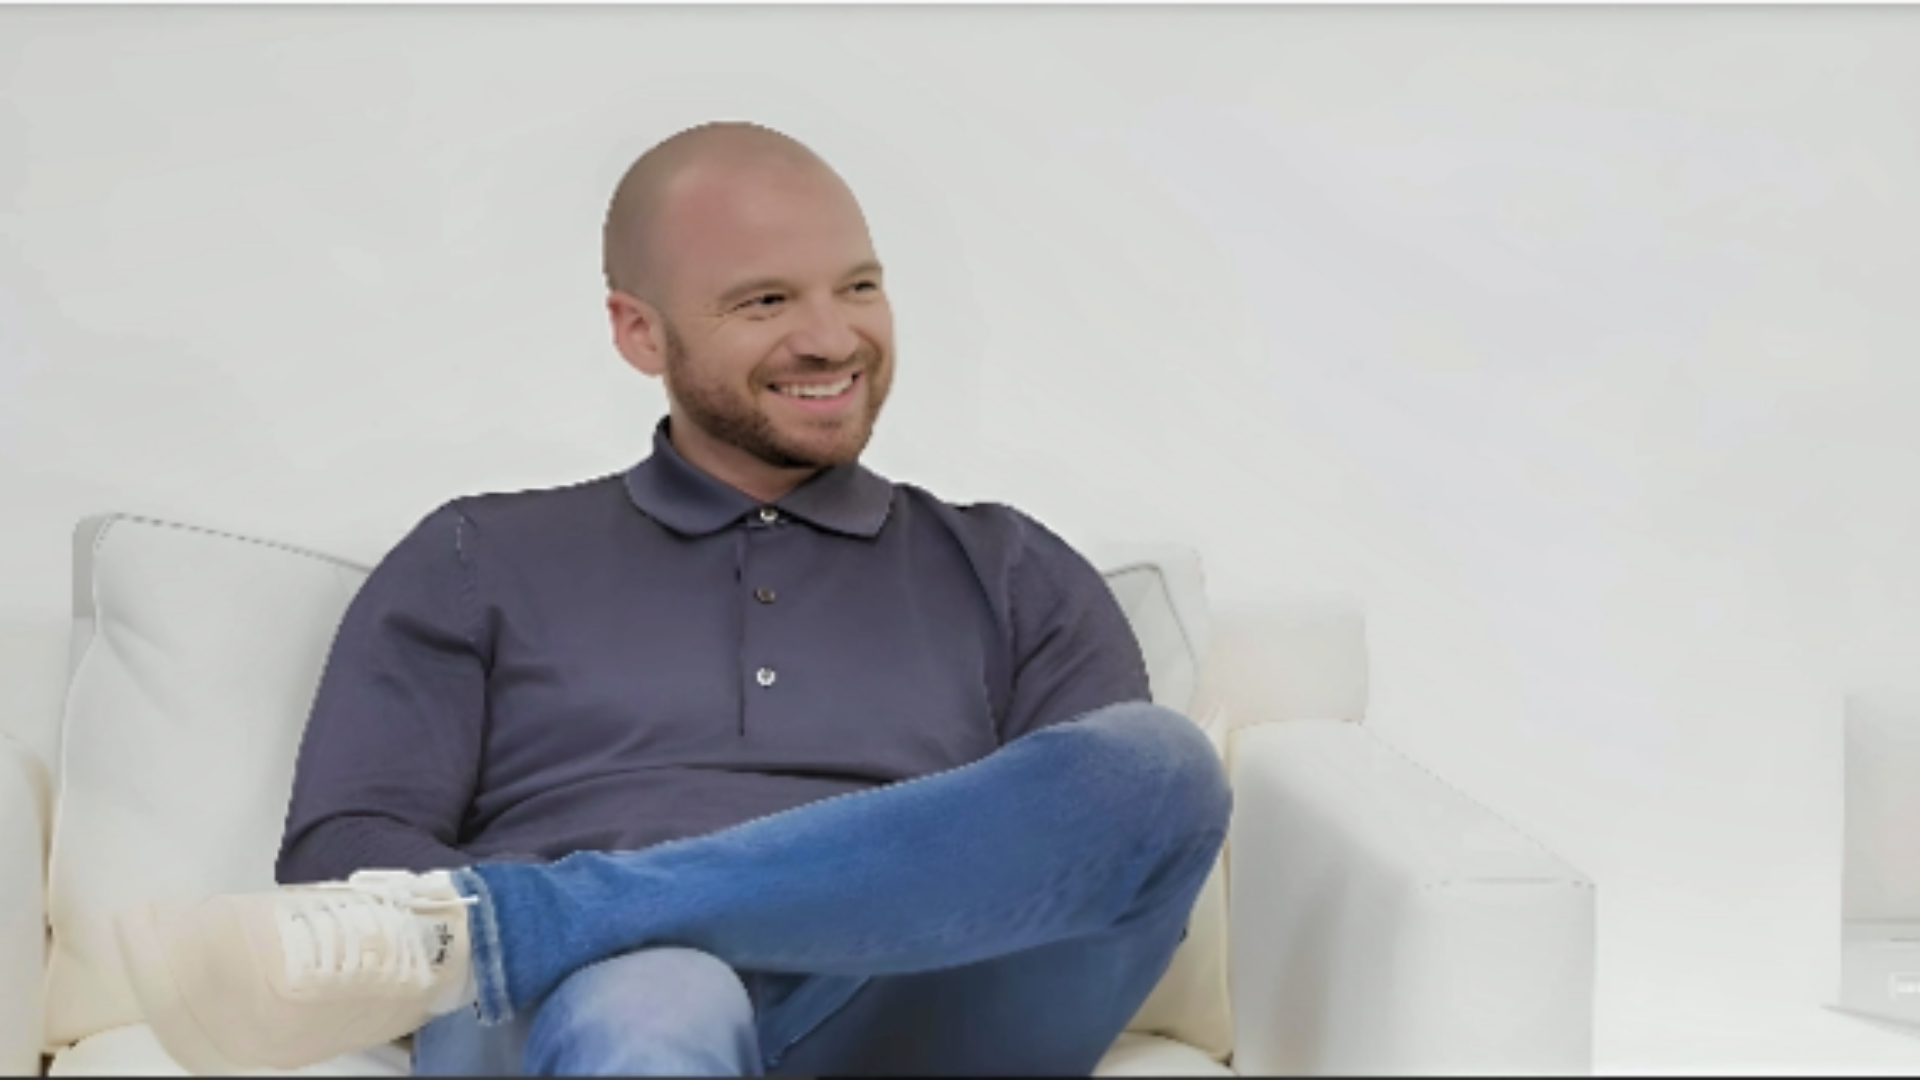 Sean Evans sitting on sofa wearing white sneakers, blue jeans and grey shirt. Mesmerizing smile on his face, depicting Sean Evans net worth: career and earnings